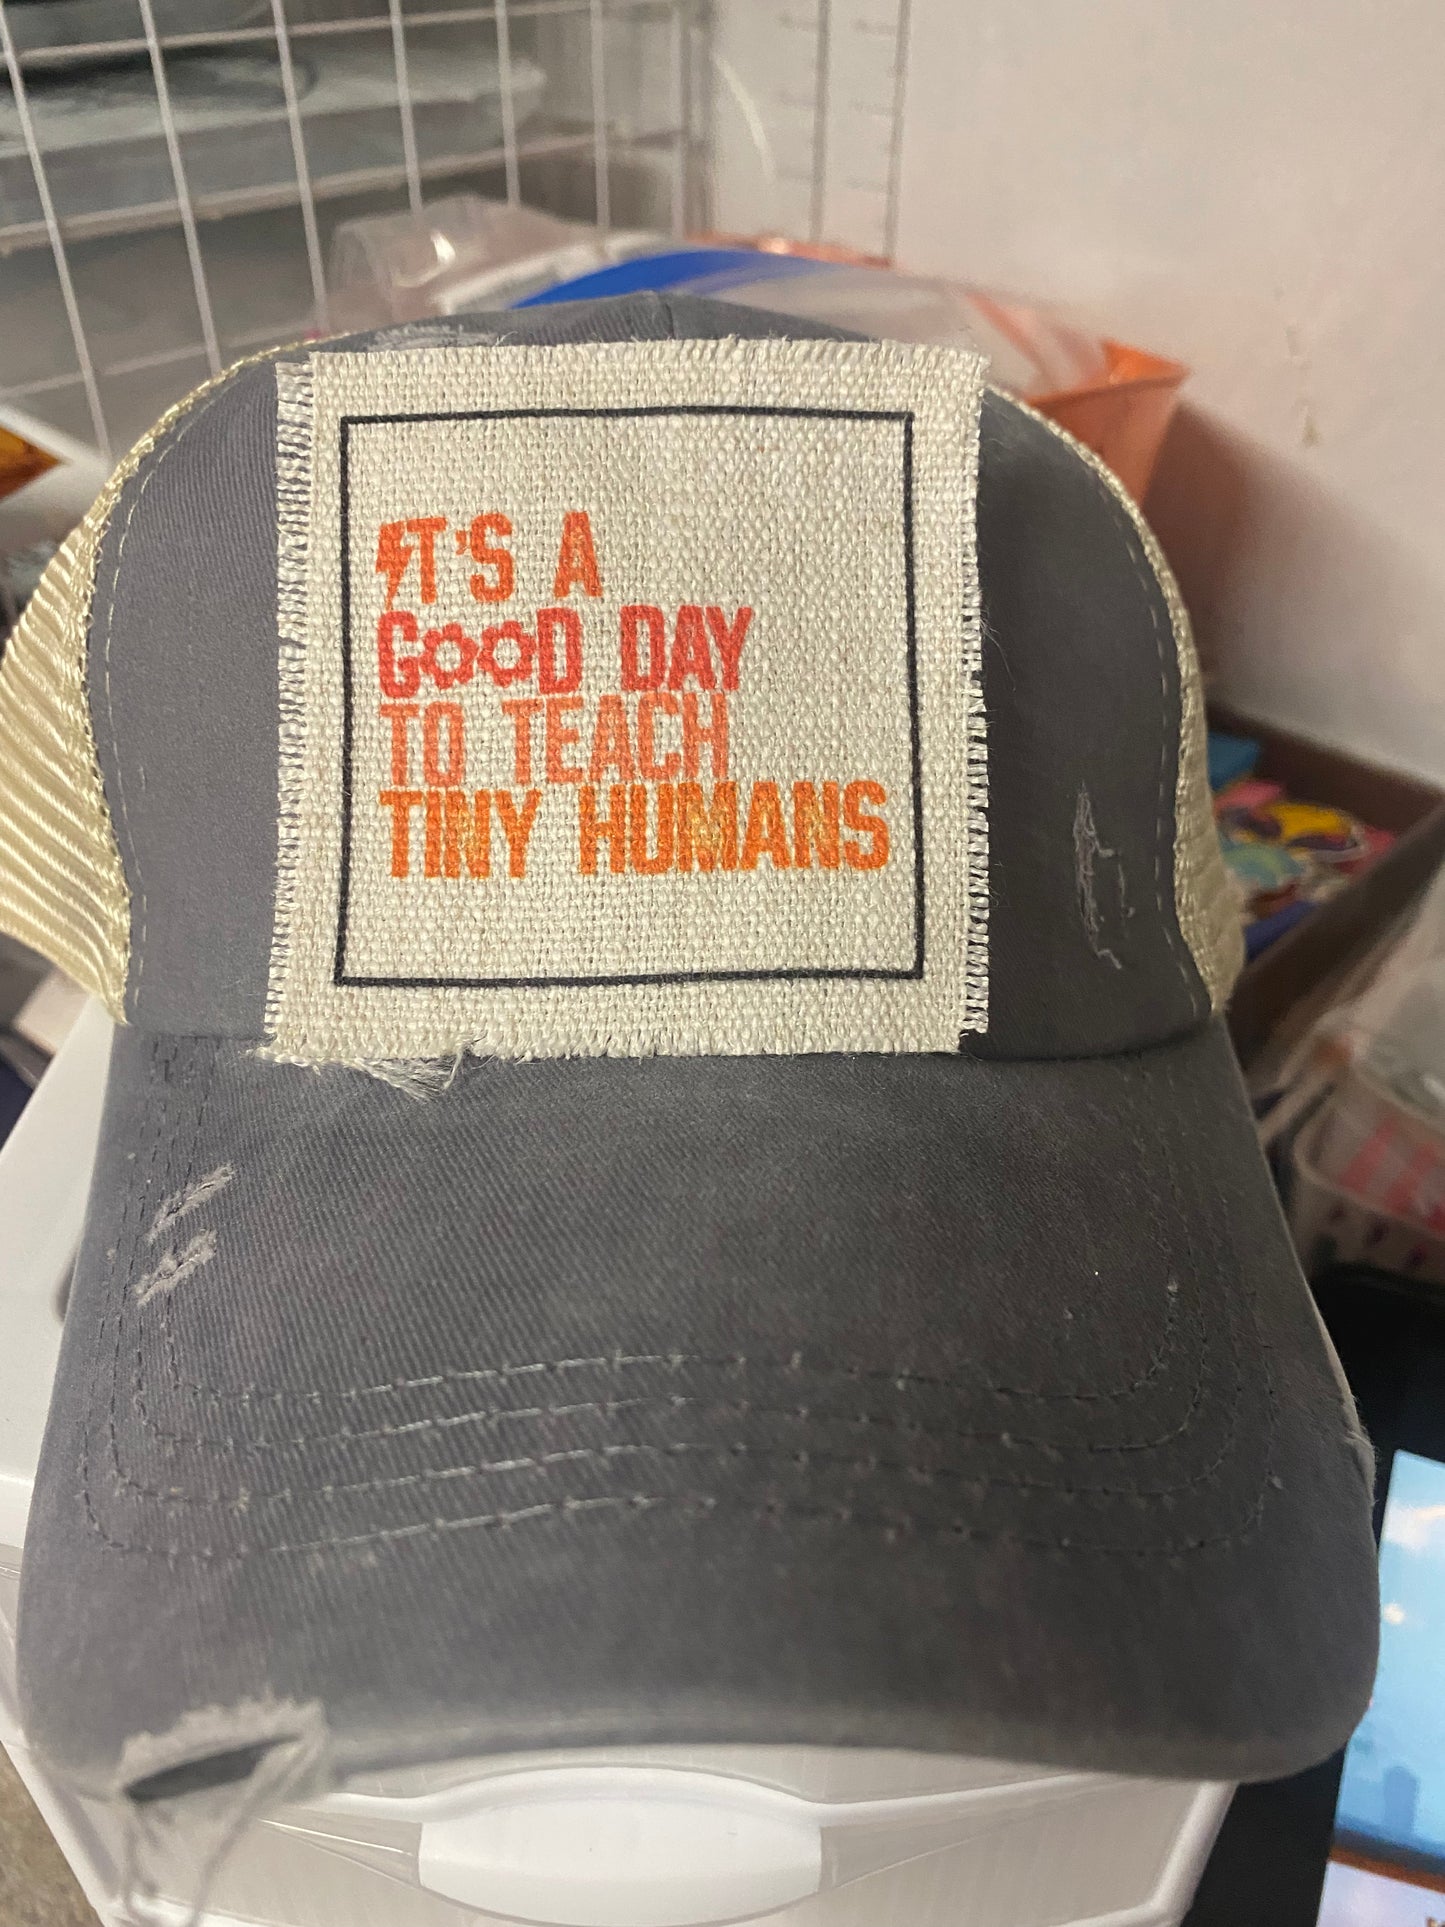 It's A Good Day To Teach Tiny Humans Hat Patch